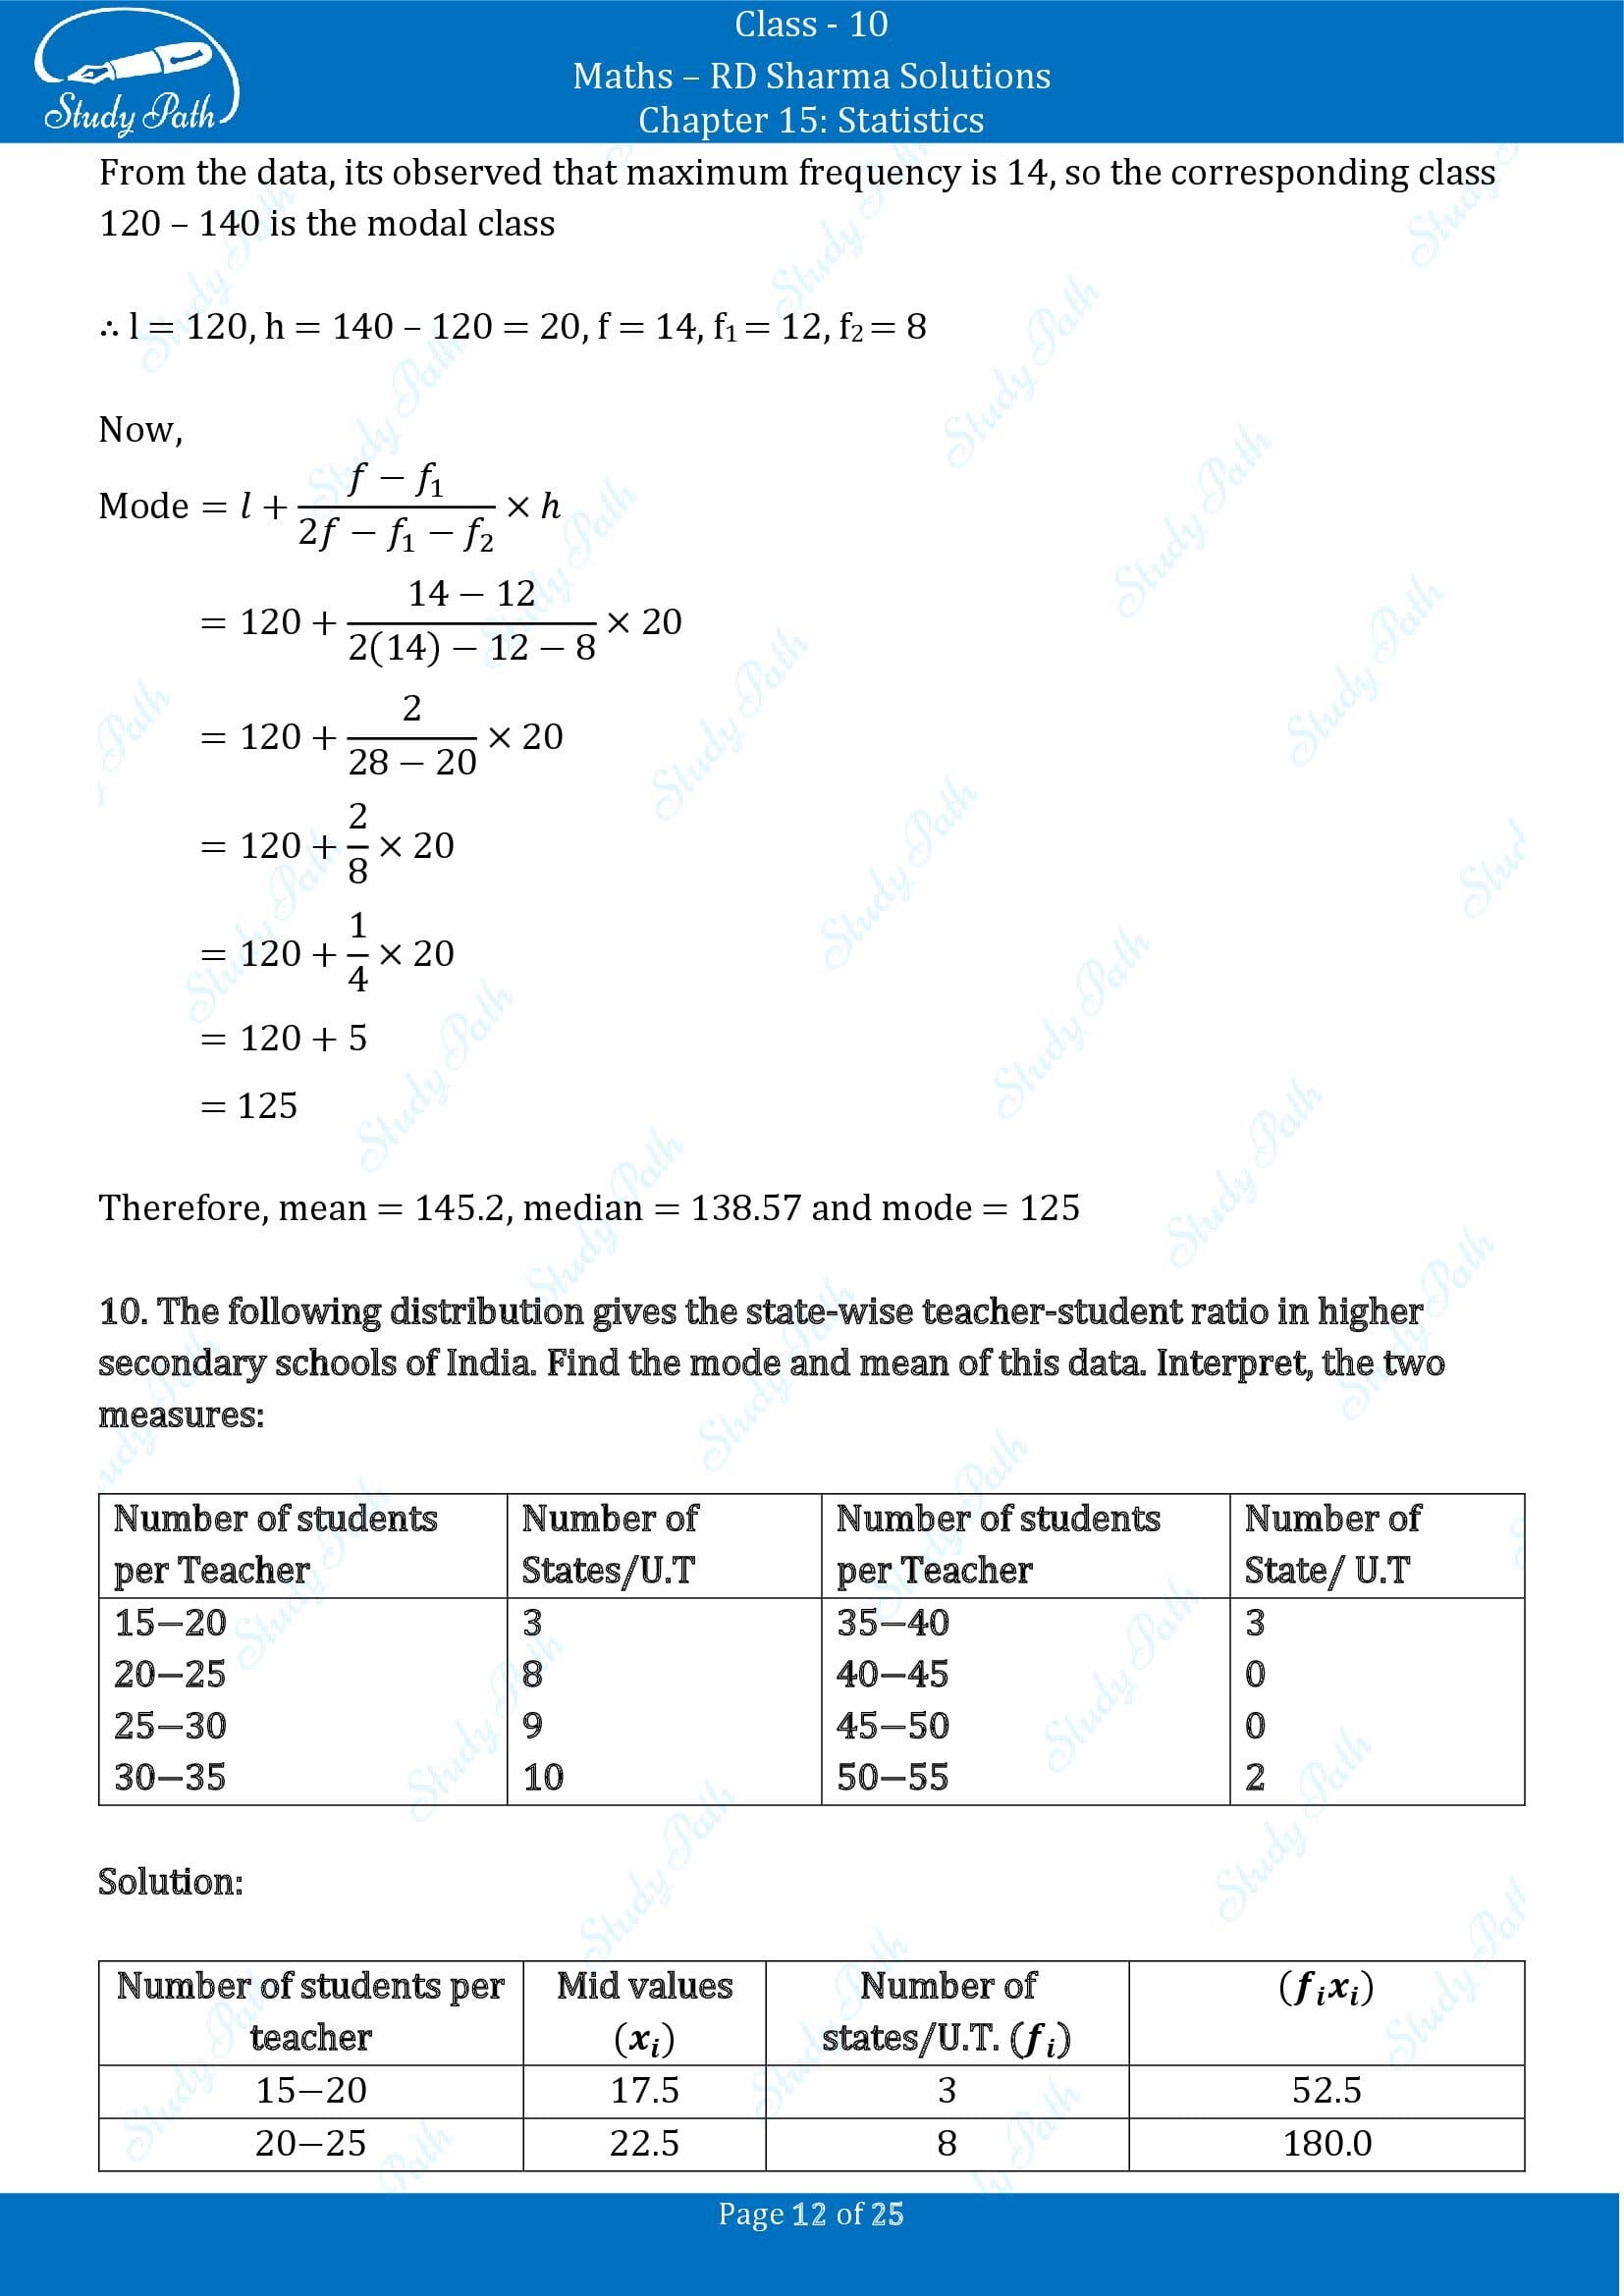 RD Sharma Solutions Class 10 Chapter 15 Statistics Exercise 15.5 00012